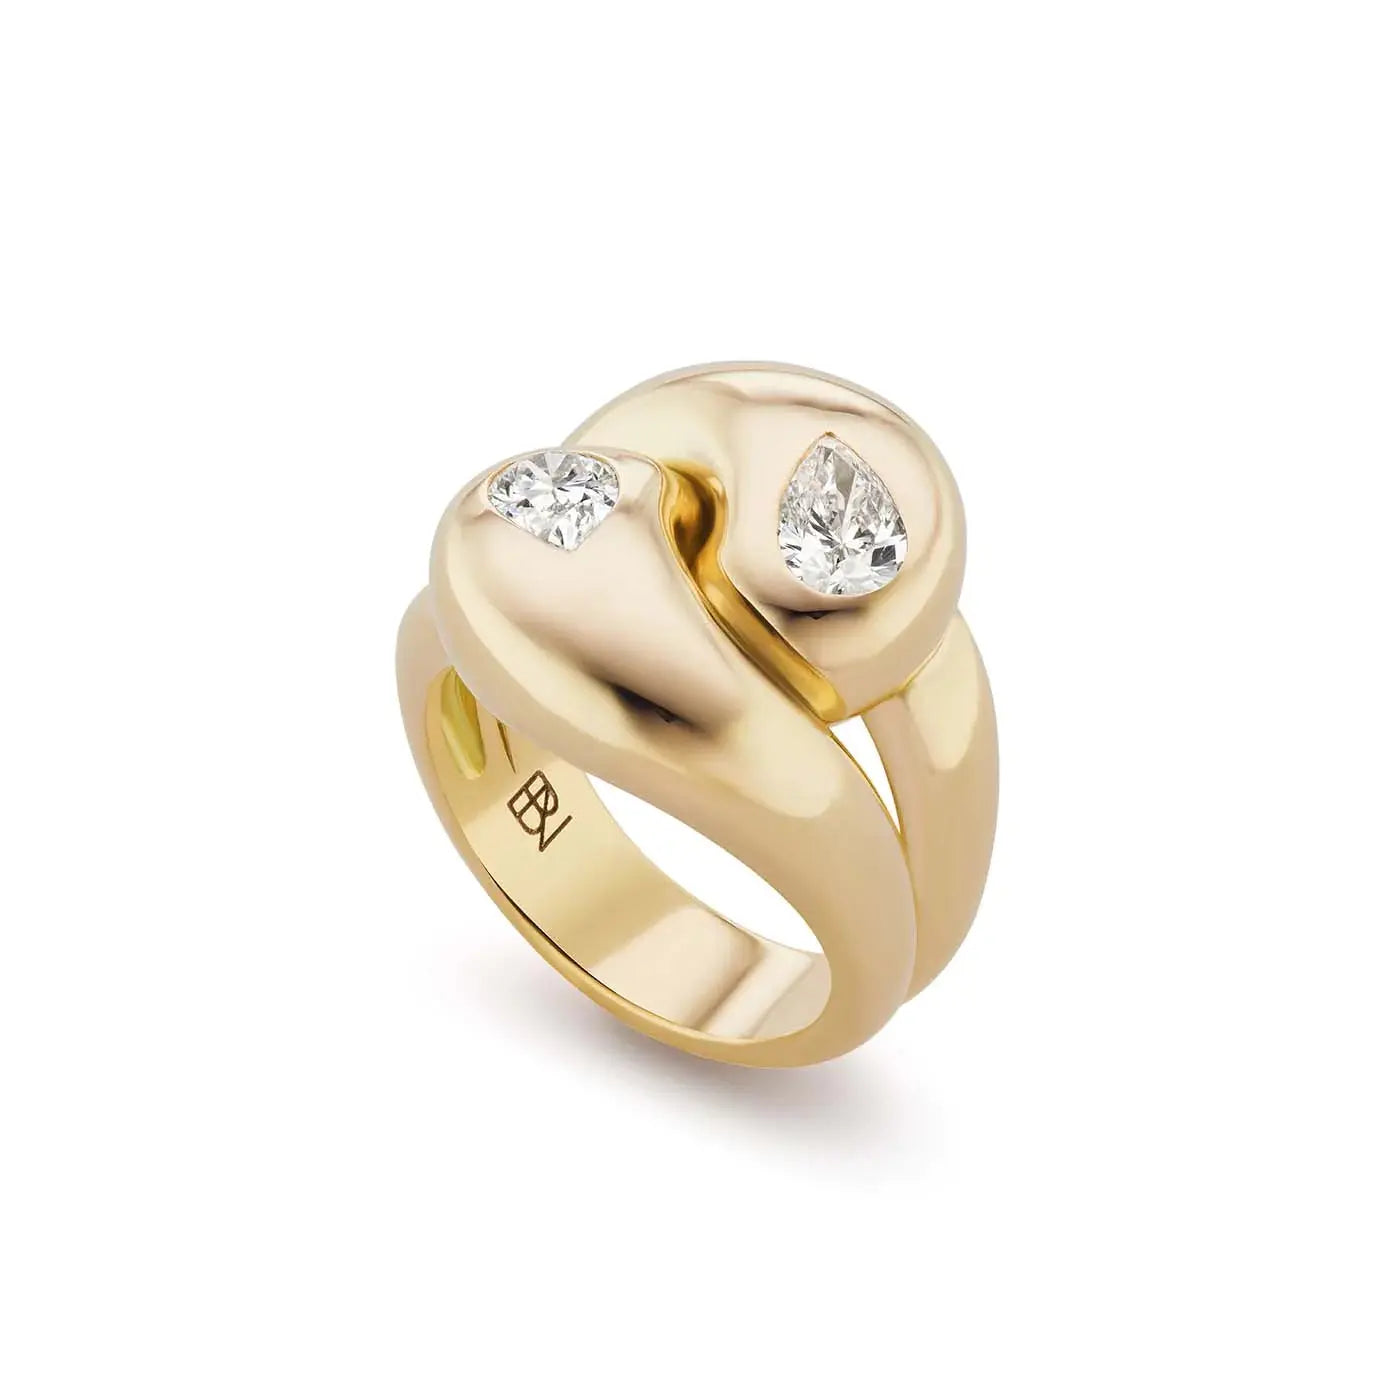 Brent Neale Knot Ring with Pear Shape Diamond - Squash Blossom Vail